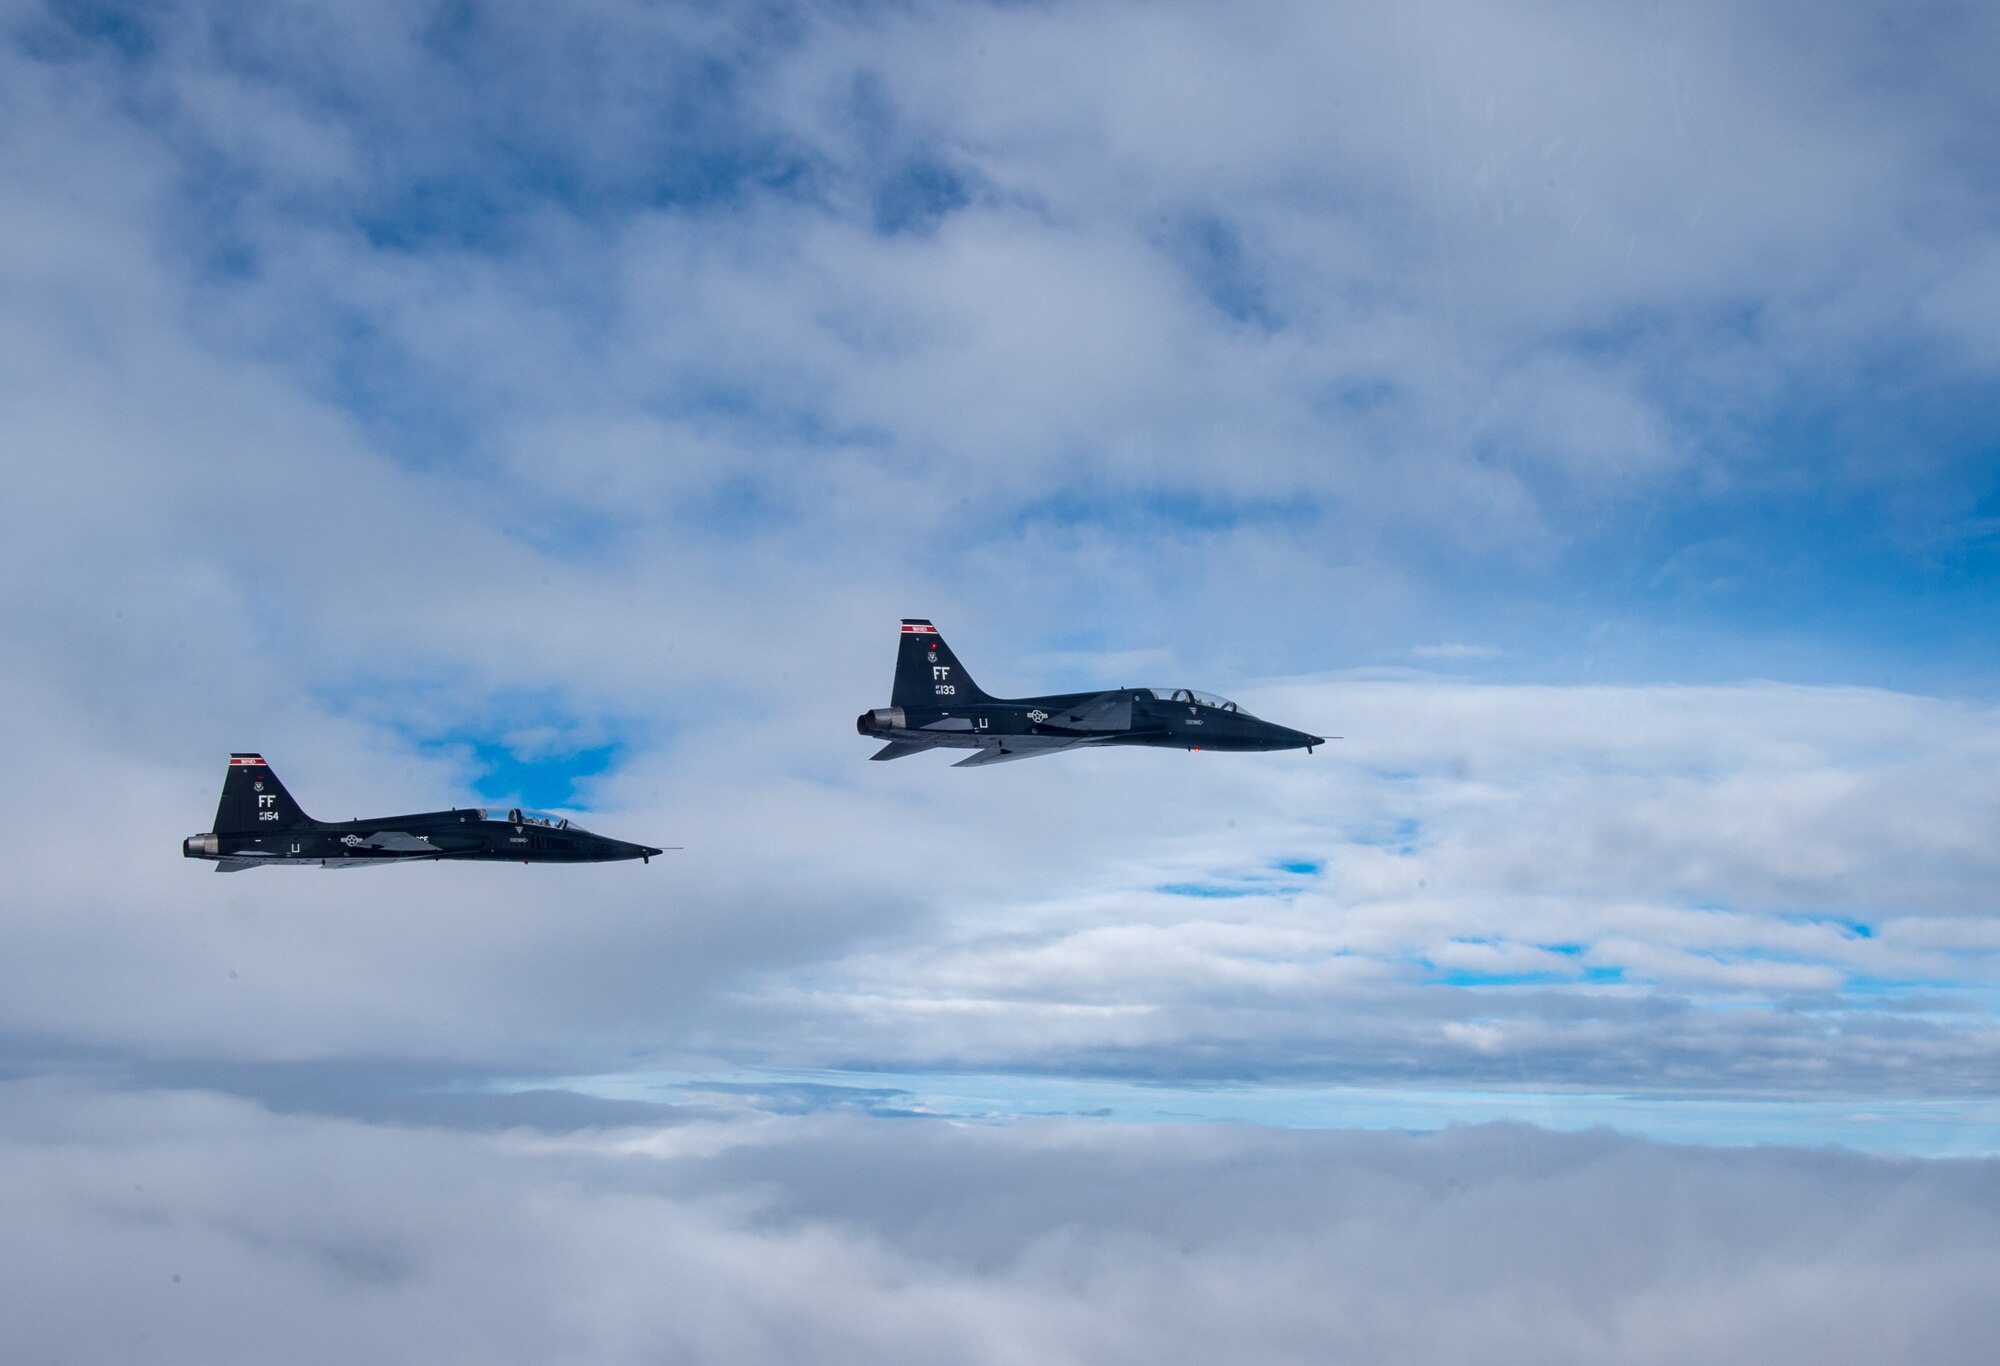 U.S. Air Force T-38 Talons from the 1st Fighter Wing fly in formation of the Atlantic Ocean during training off the coast of Virginia, Oct. 30, 2019. The 1st Fighter Wing is home to the 94th Fighter Squadron, 27th Fighter Squadron and the 71st Fighter Training Squadron at Joint Base Langley-Eustis, Va. (U.S. Air Force Photo by Tech Sgt. Carlin Leslie)(Released)